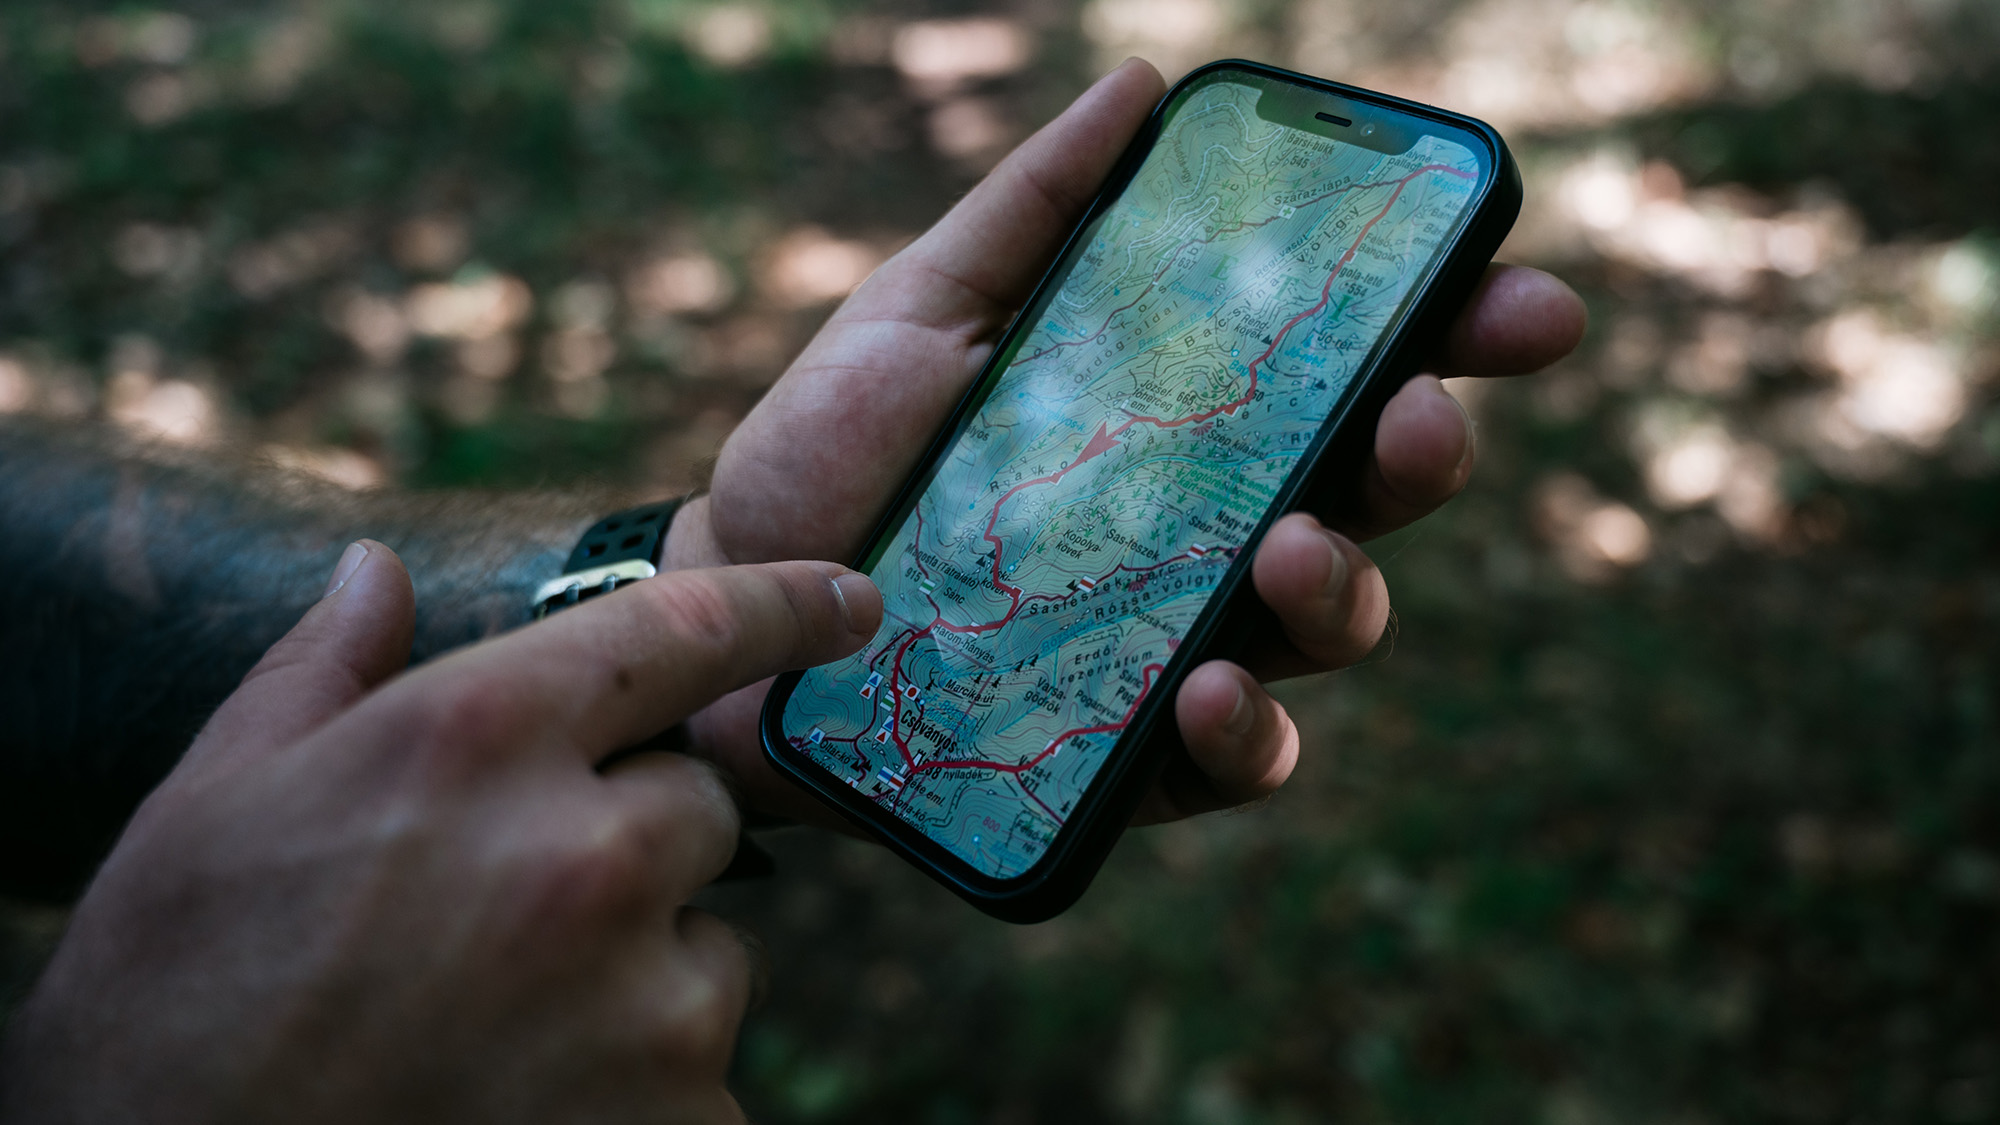 A person in the forest holding an iPhone with a map on its screen, potentially a situation where you'd want to share your location with someone else.